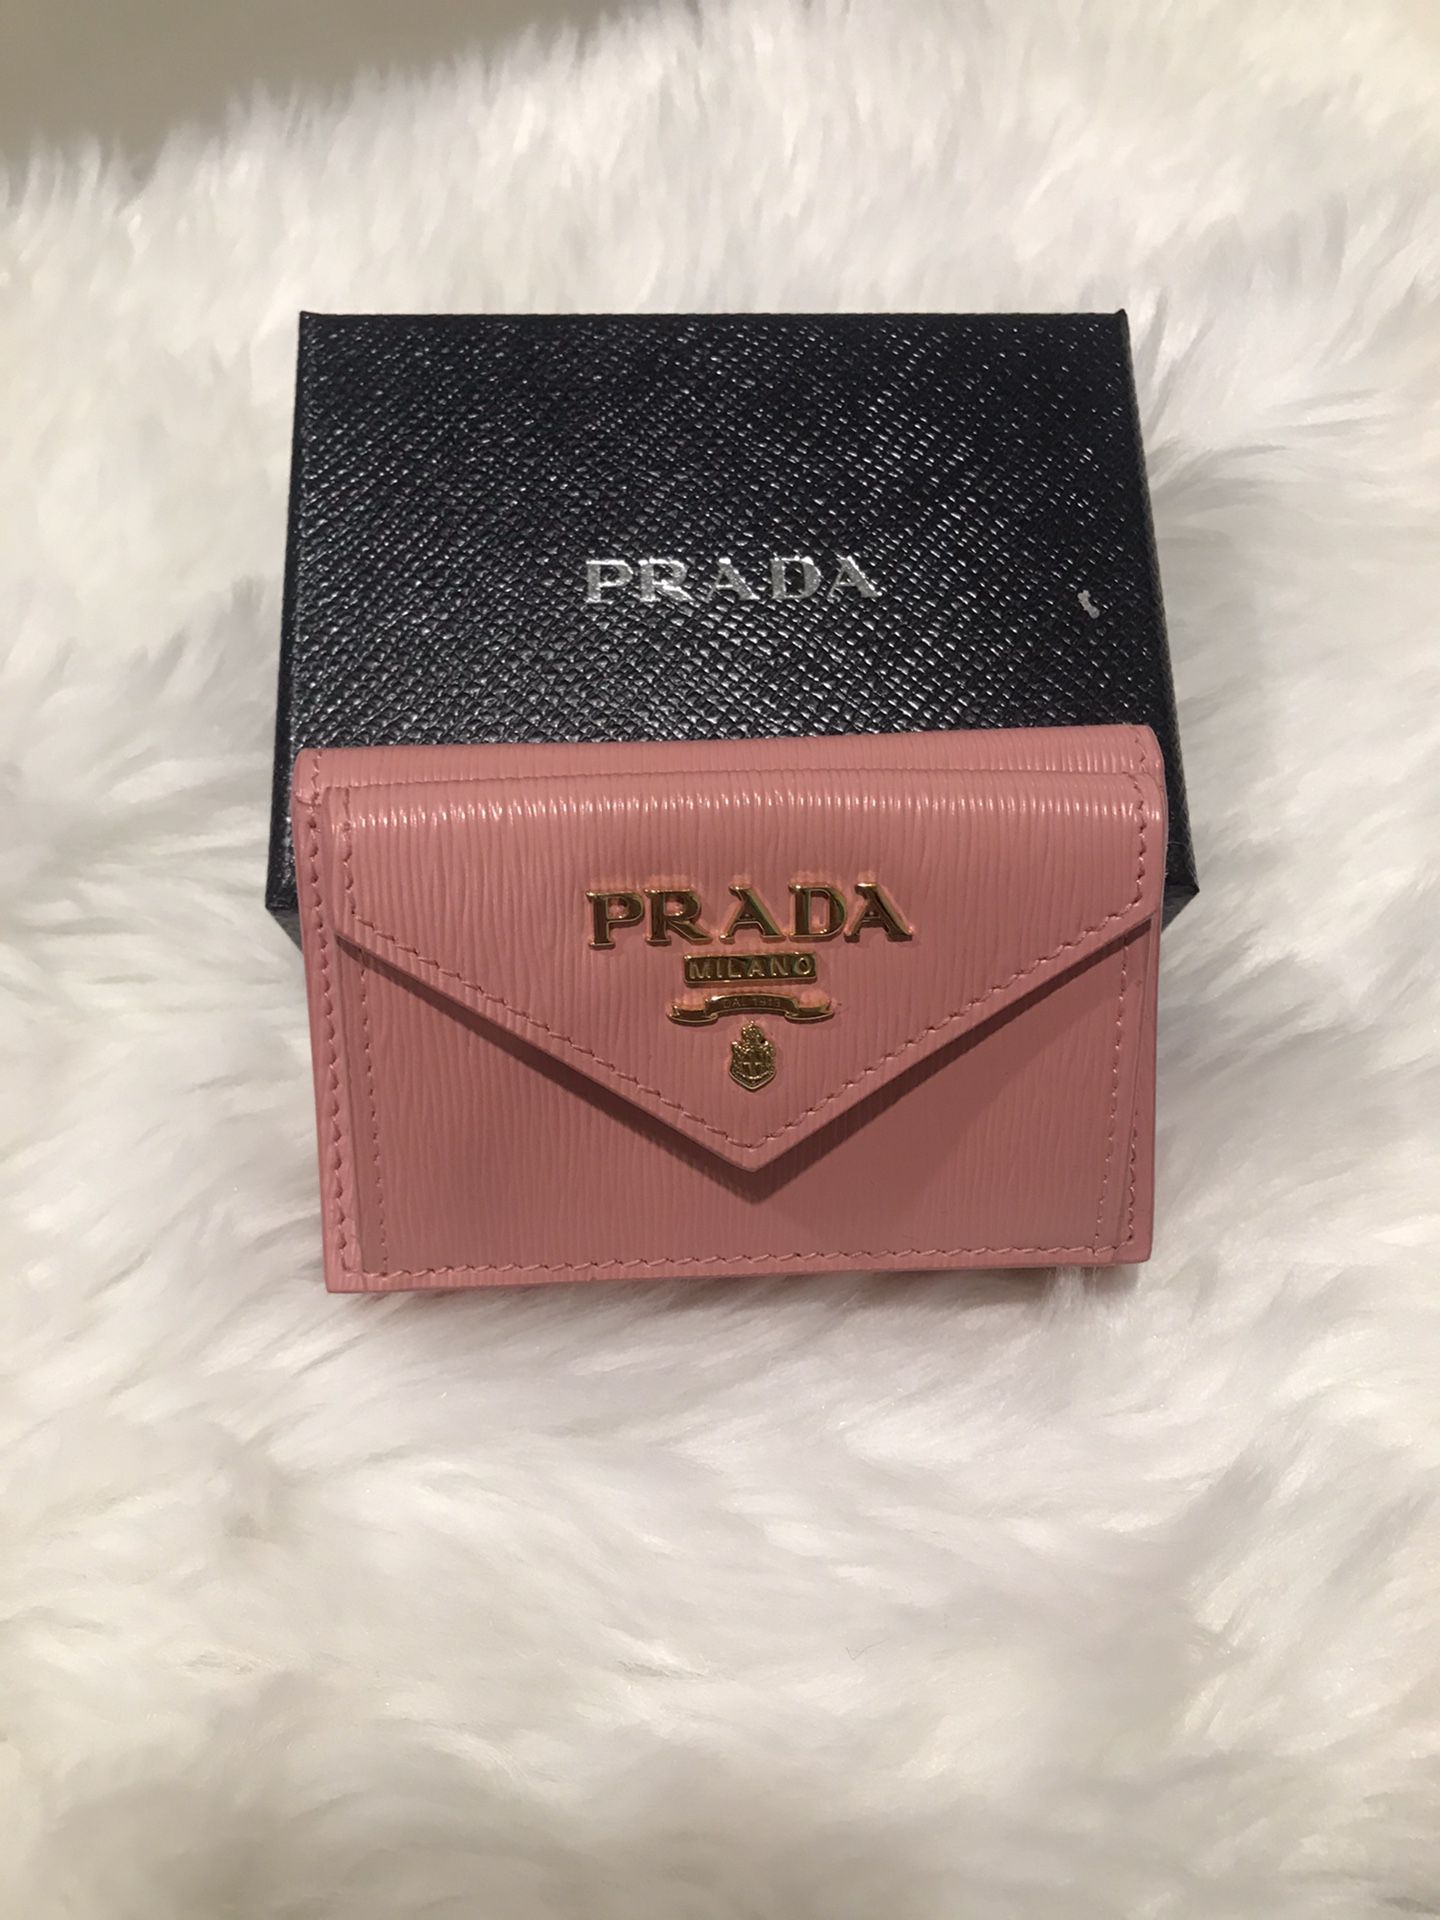 Prada small wallet with a lot of compartments